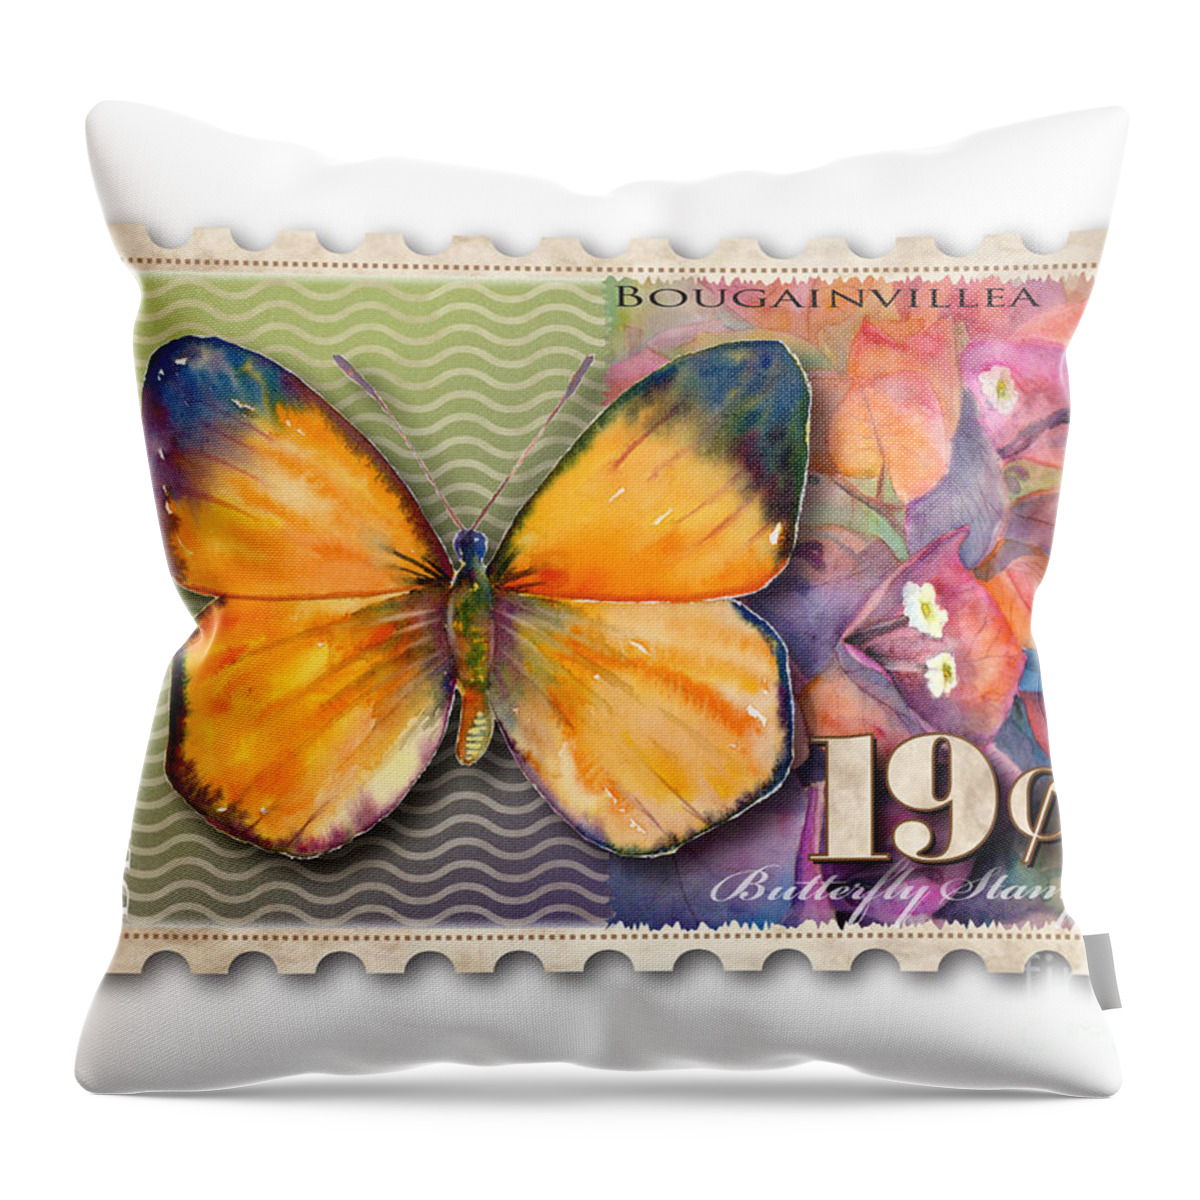 Delias Throw Pillow featuring the painting 19 Cent Butterfly Stamp by Amy Kirkpatrick